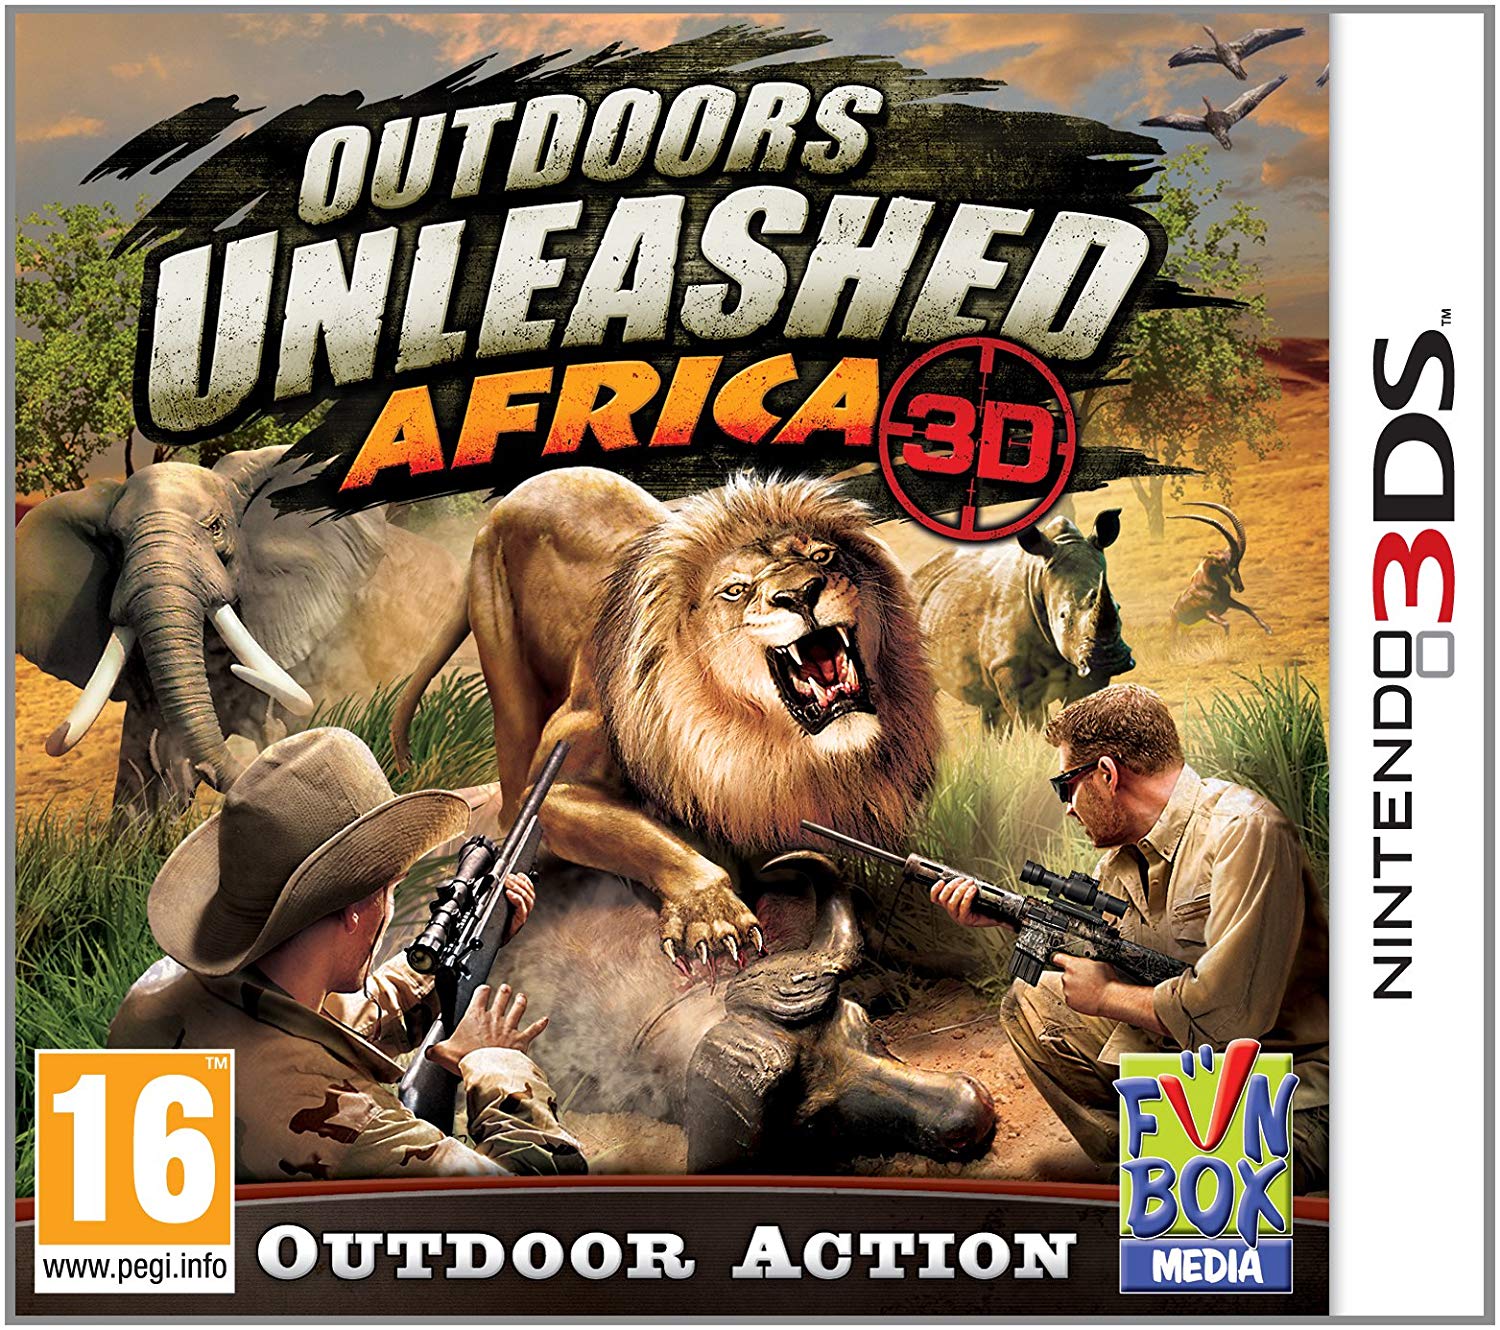 Outdoors Unleashed Africa 3D